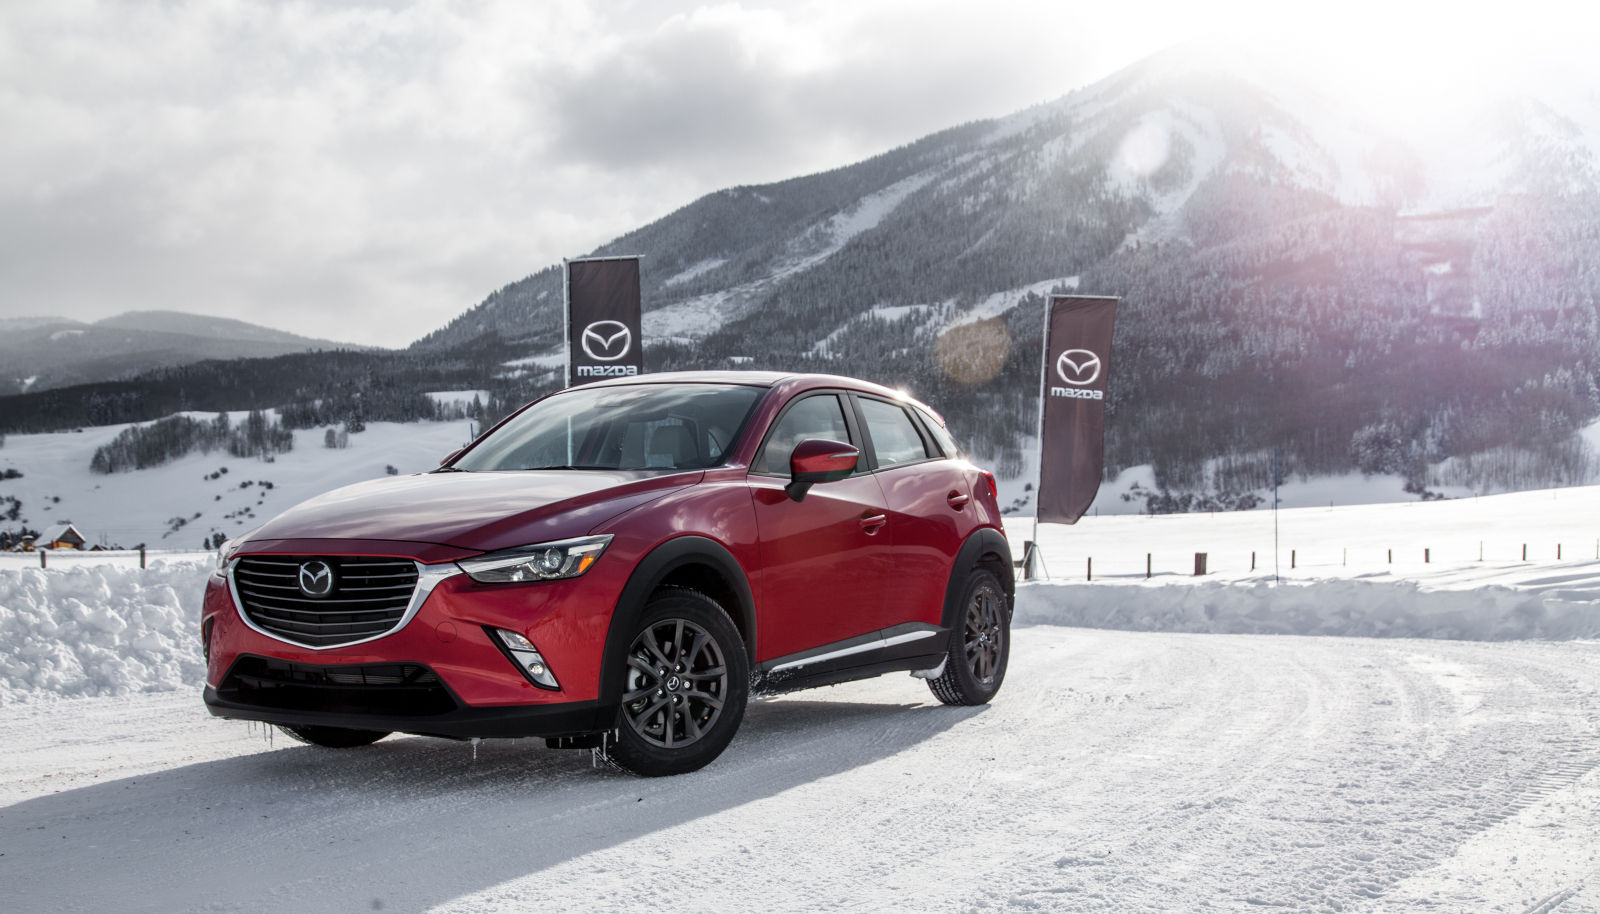 Three Reasons to Buy a Pre-Owned Mazda CX-3